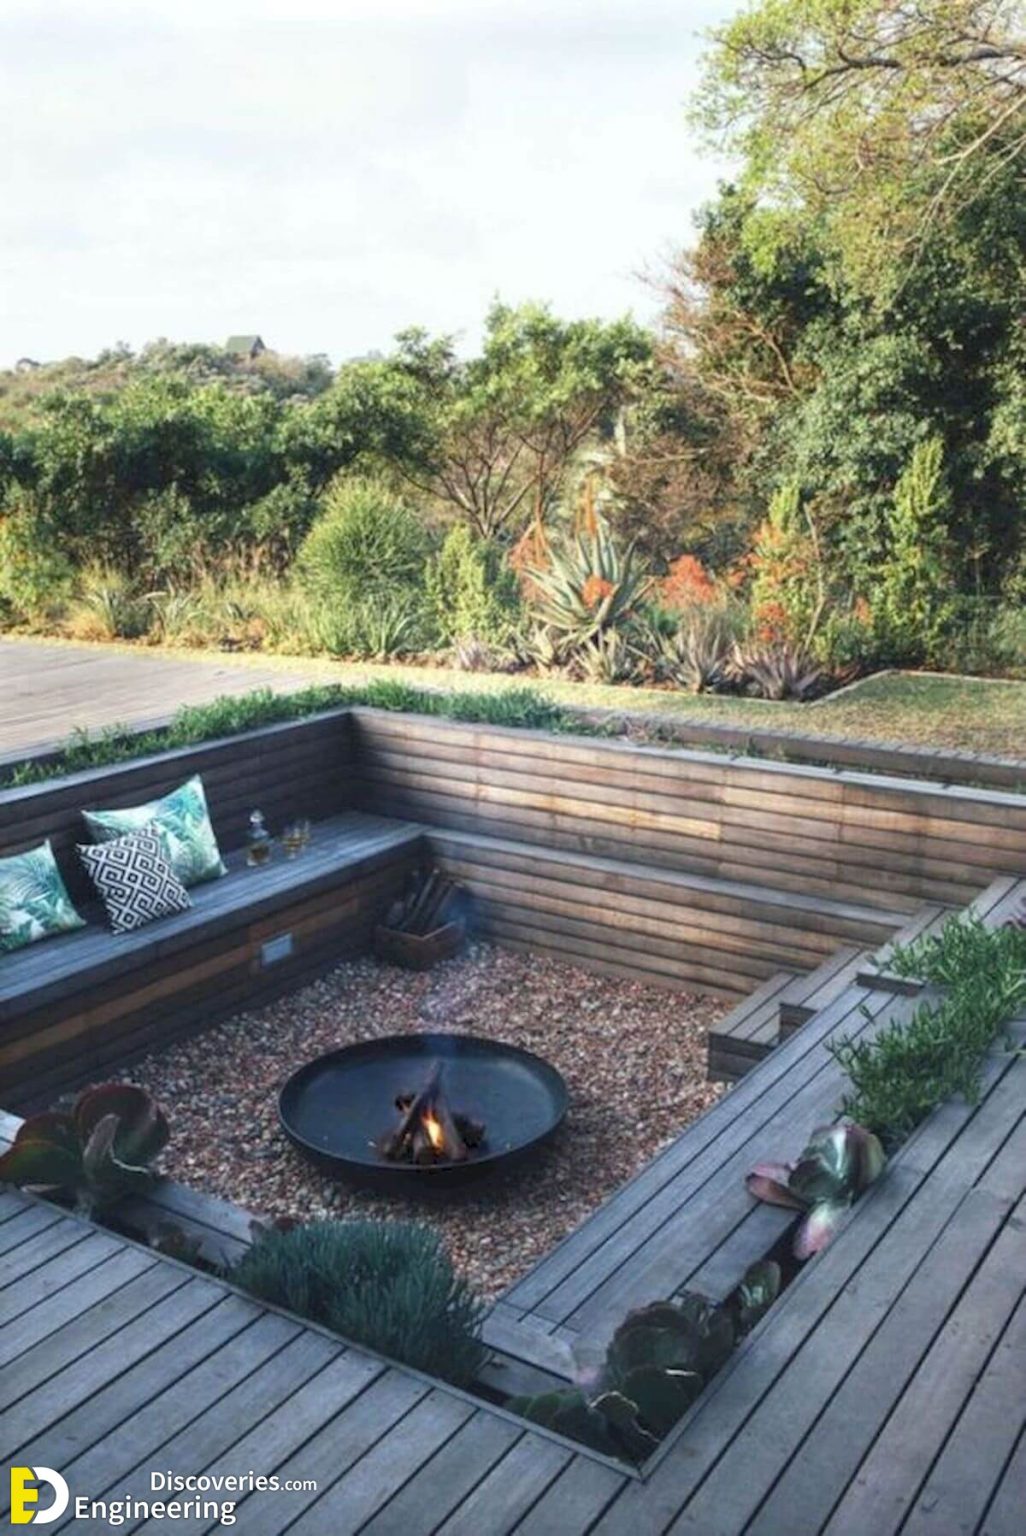 40 Amazing Backyard Fire Pit Ideas - Engineering Discoveries